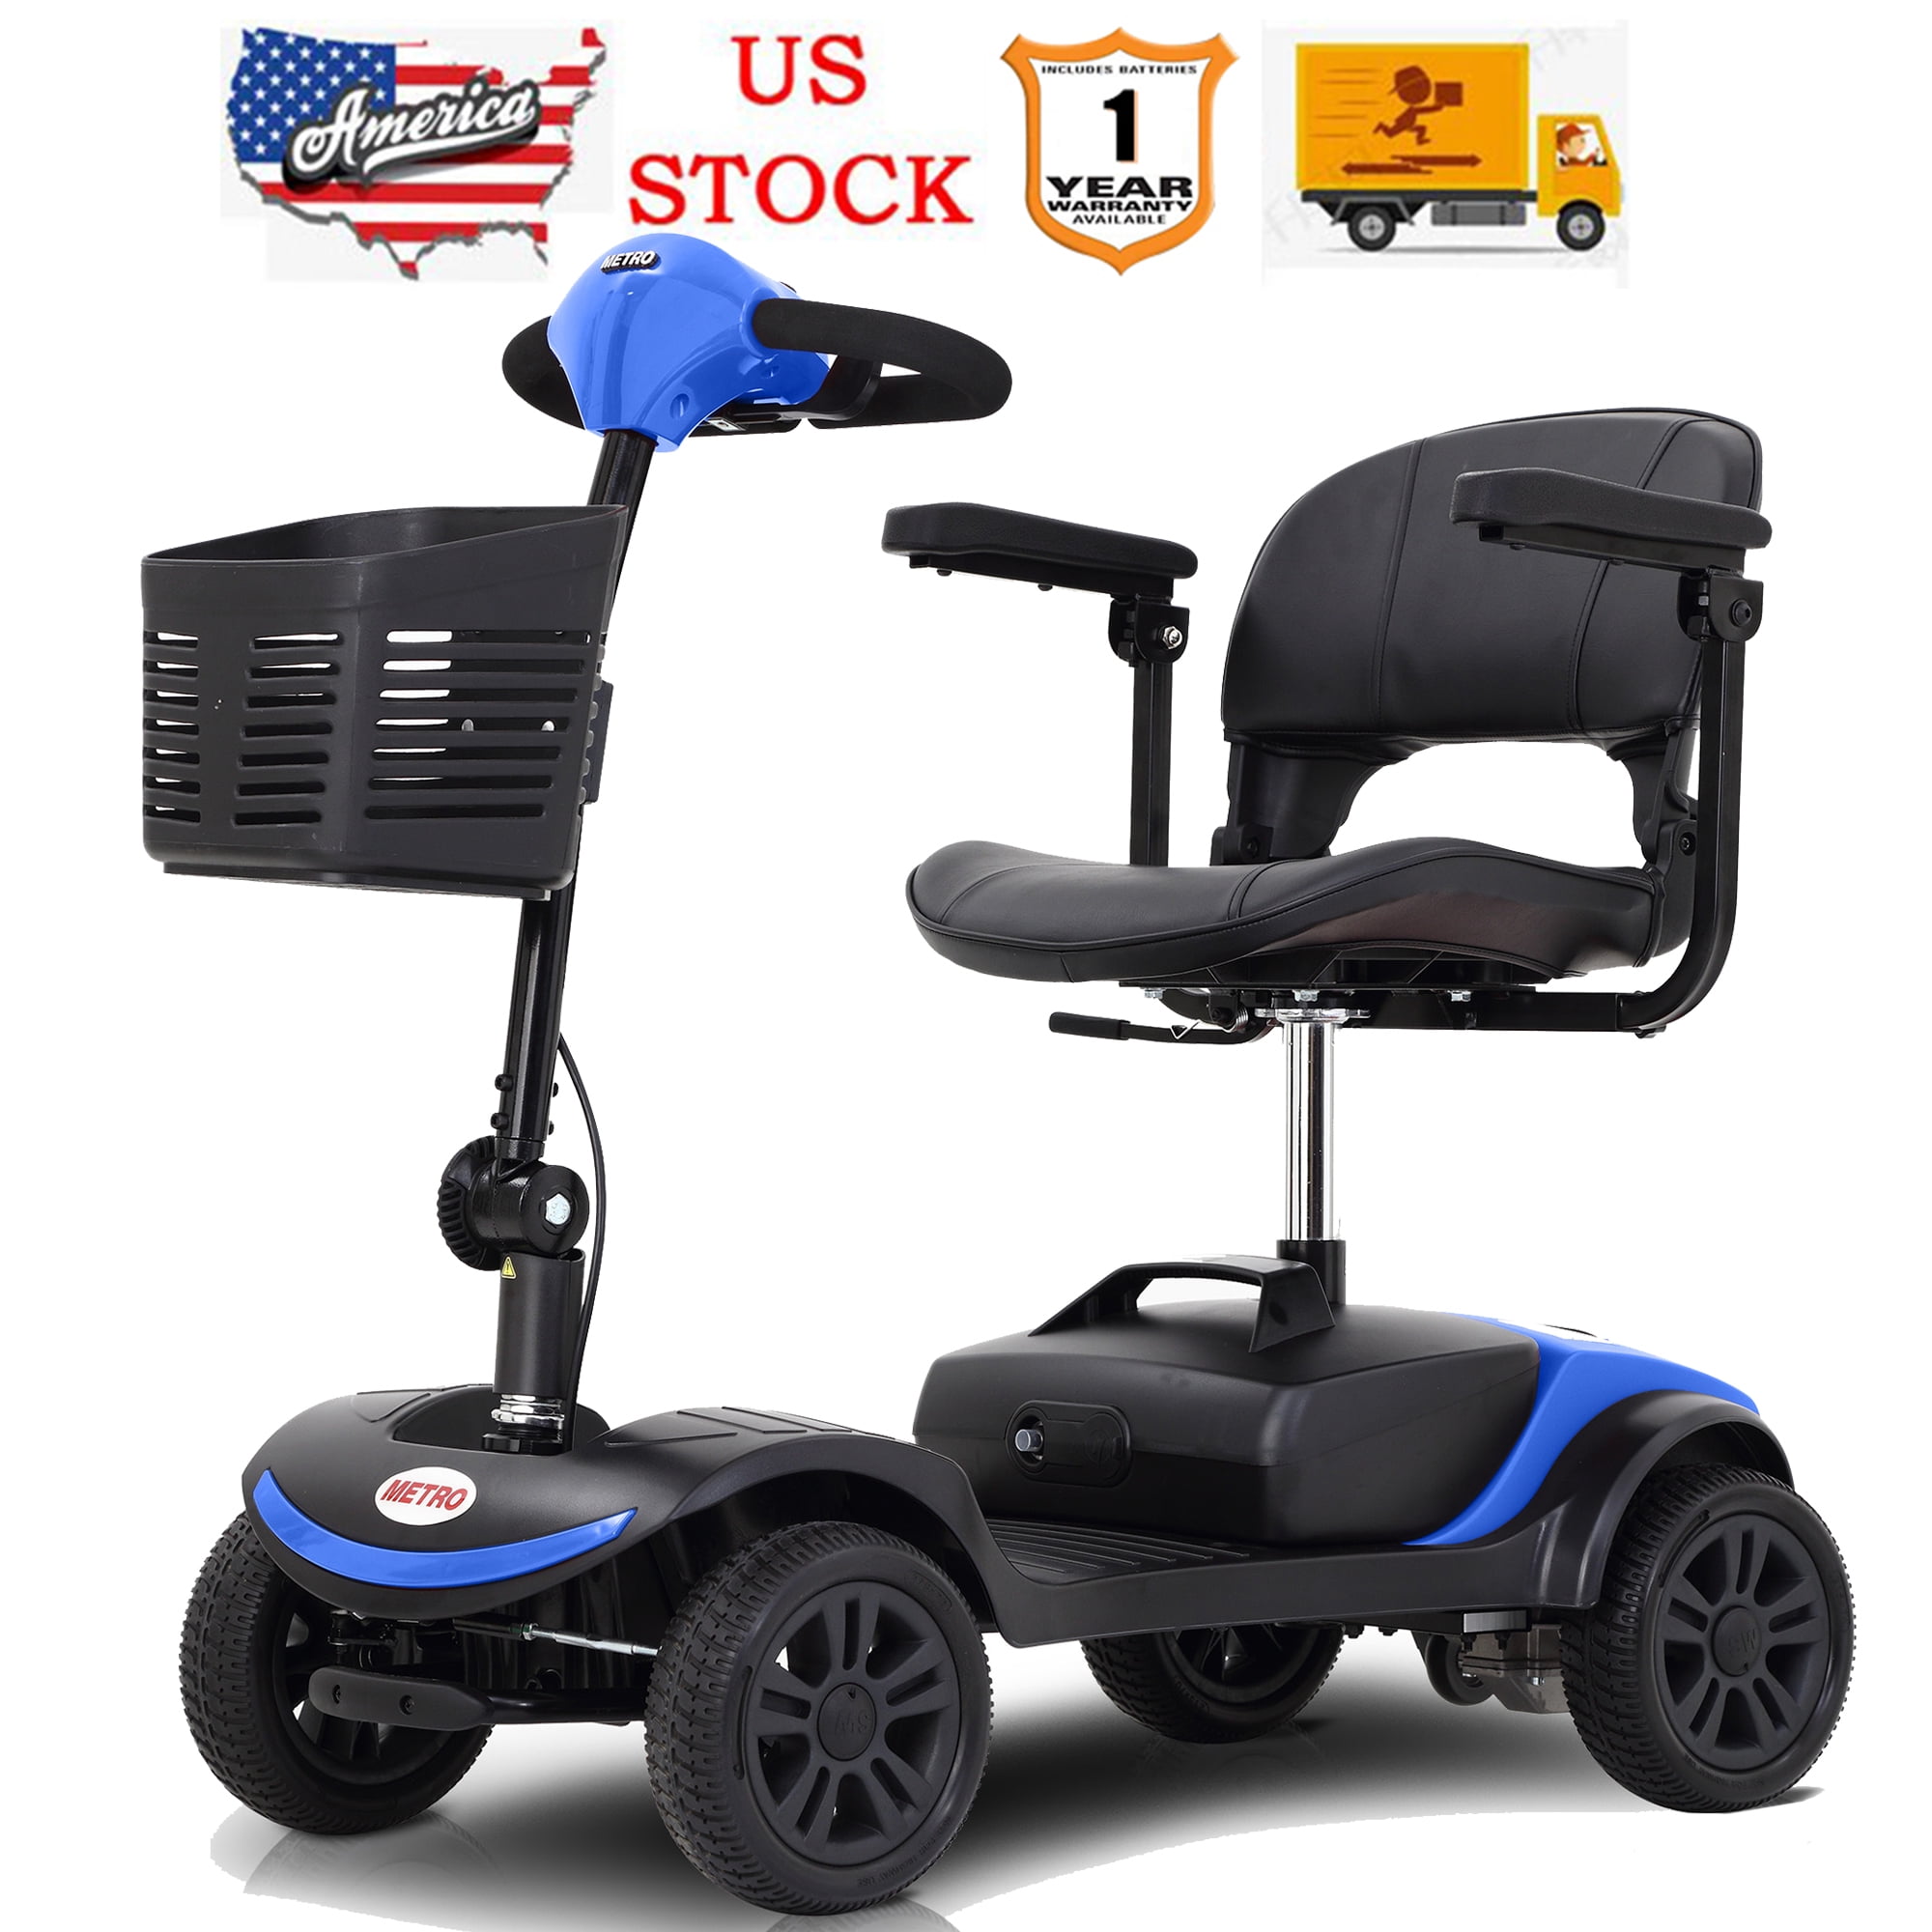 4 Wheel Mobility Scooter, Heavy Duty Electric Motorized Scooters for Seniors, Long Travel Lightweight Compact Scooter with 360° Swivel Seat, Outdoor Power Scooter With Tires, Blue, SS543 - Walmart.com